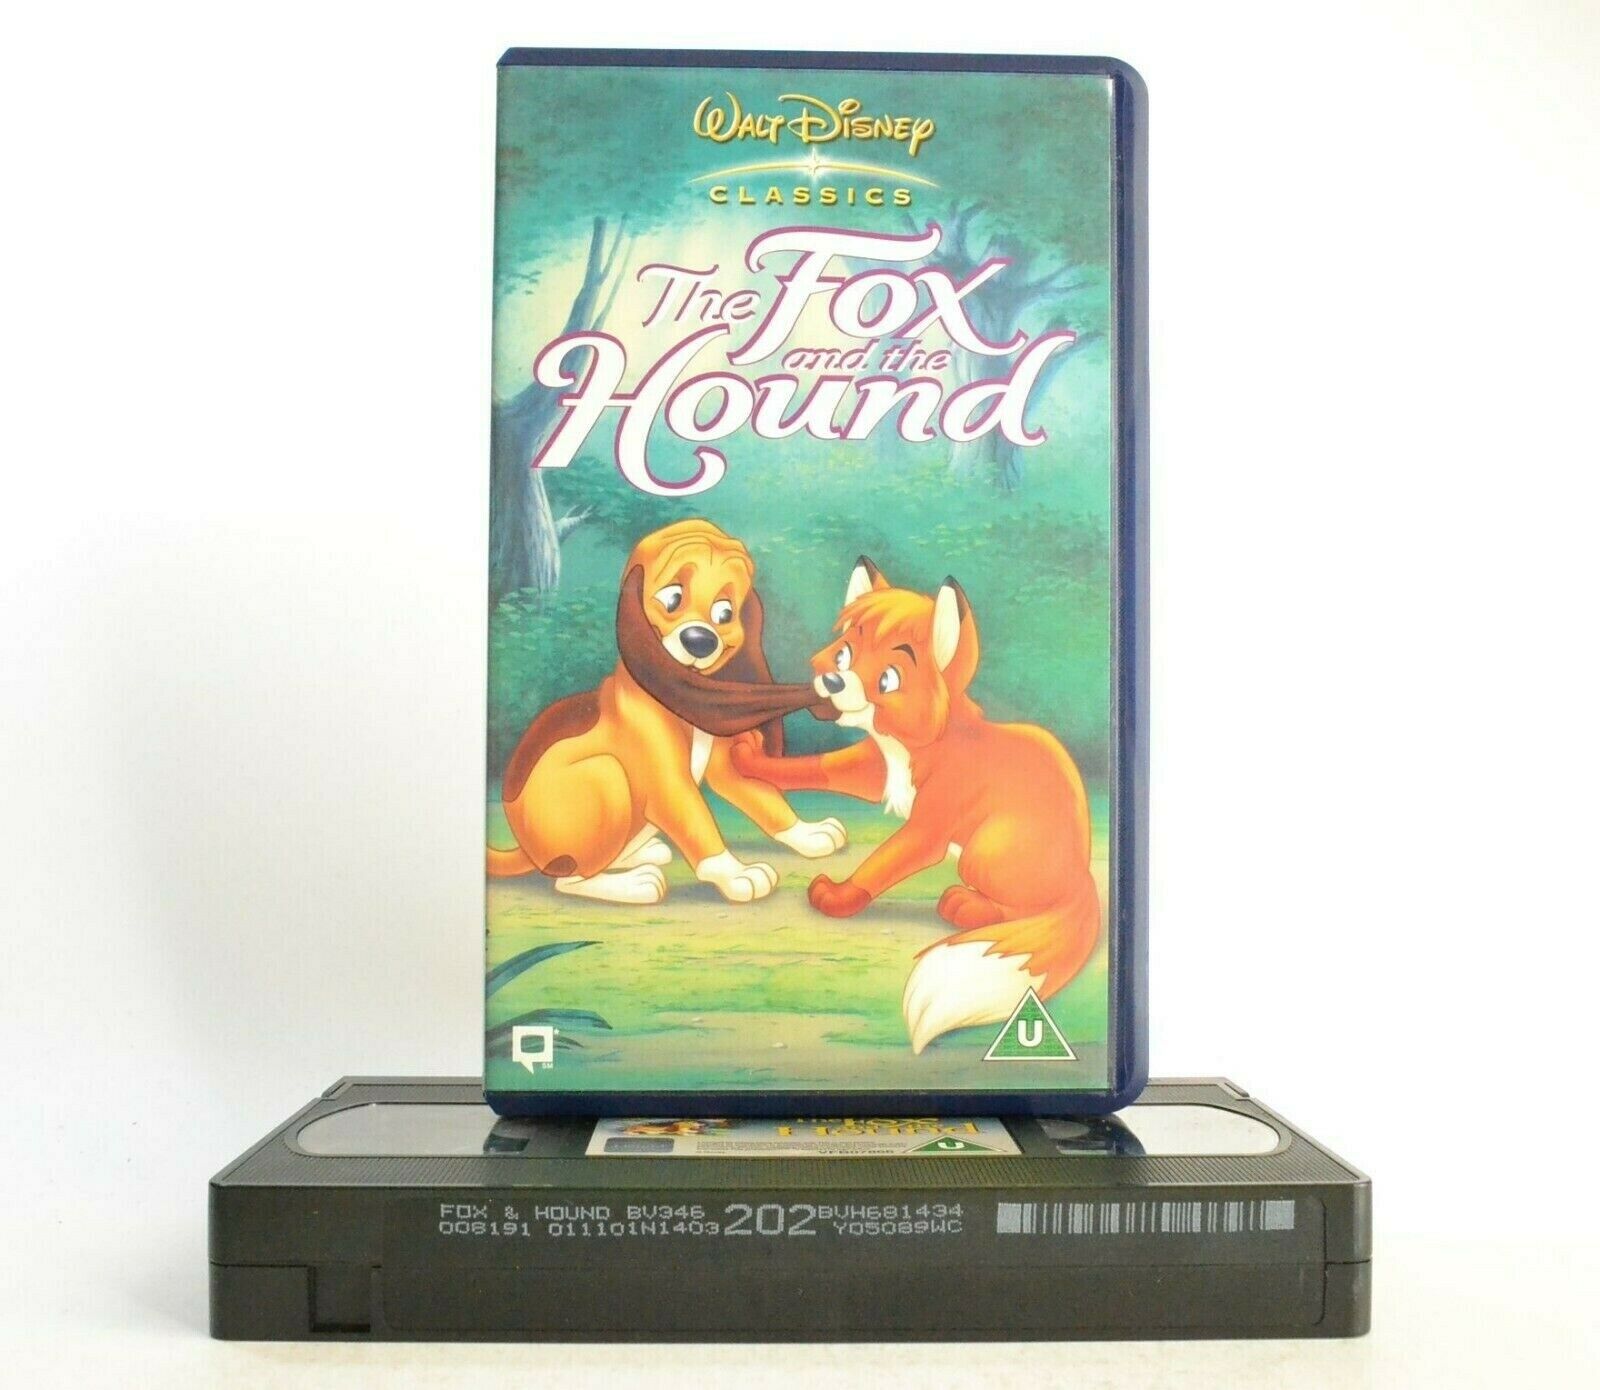 The Fox And The Hound: Disney Classics (1981) - Animated - Children's - Pal VHS-